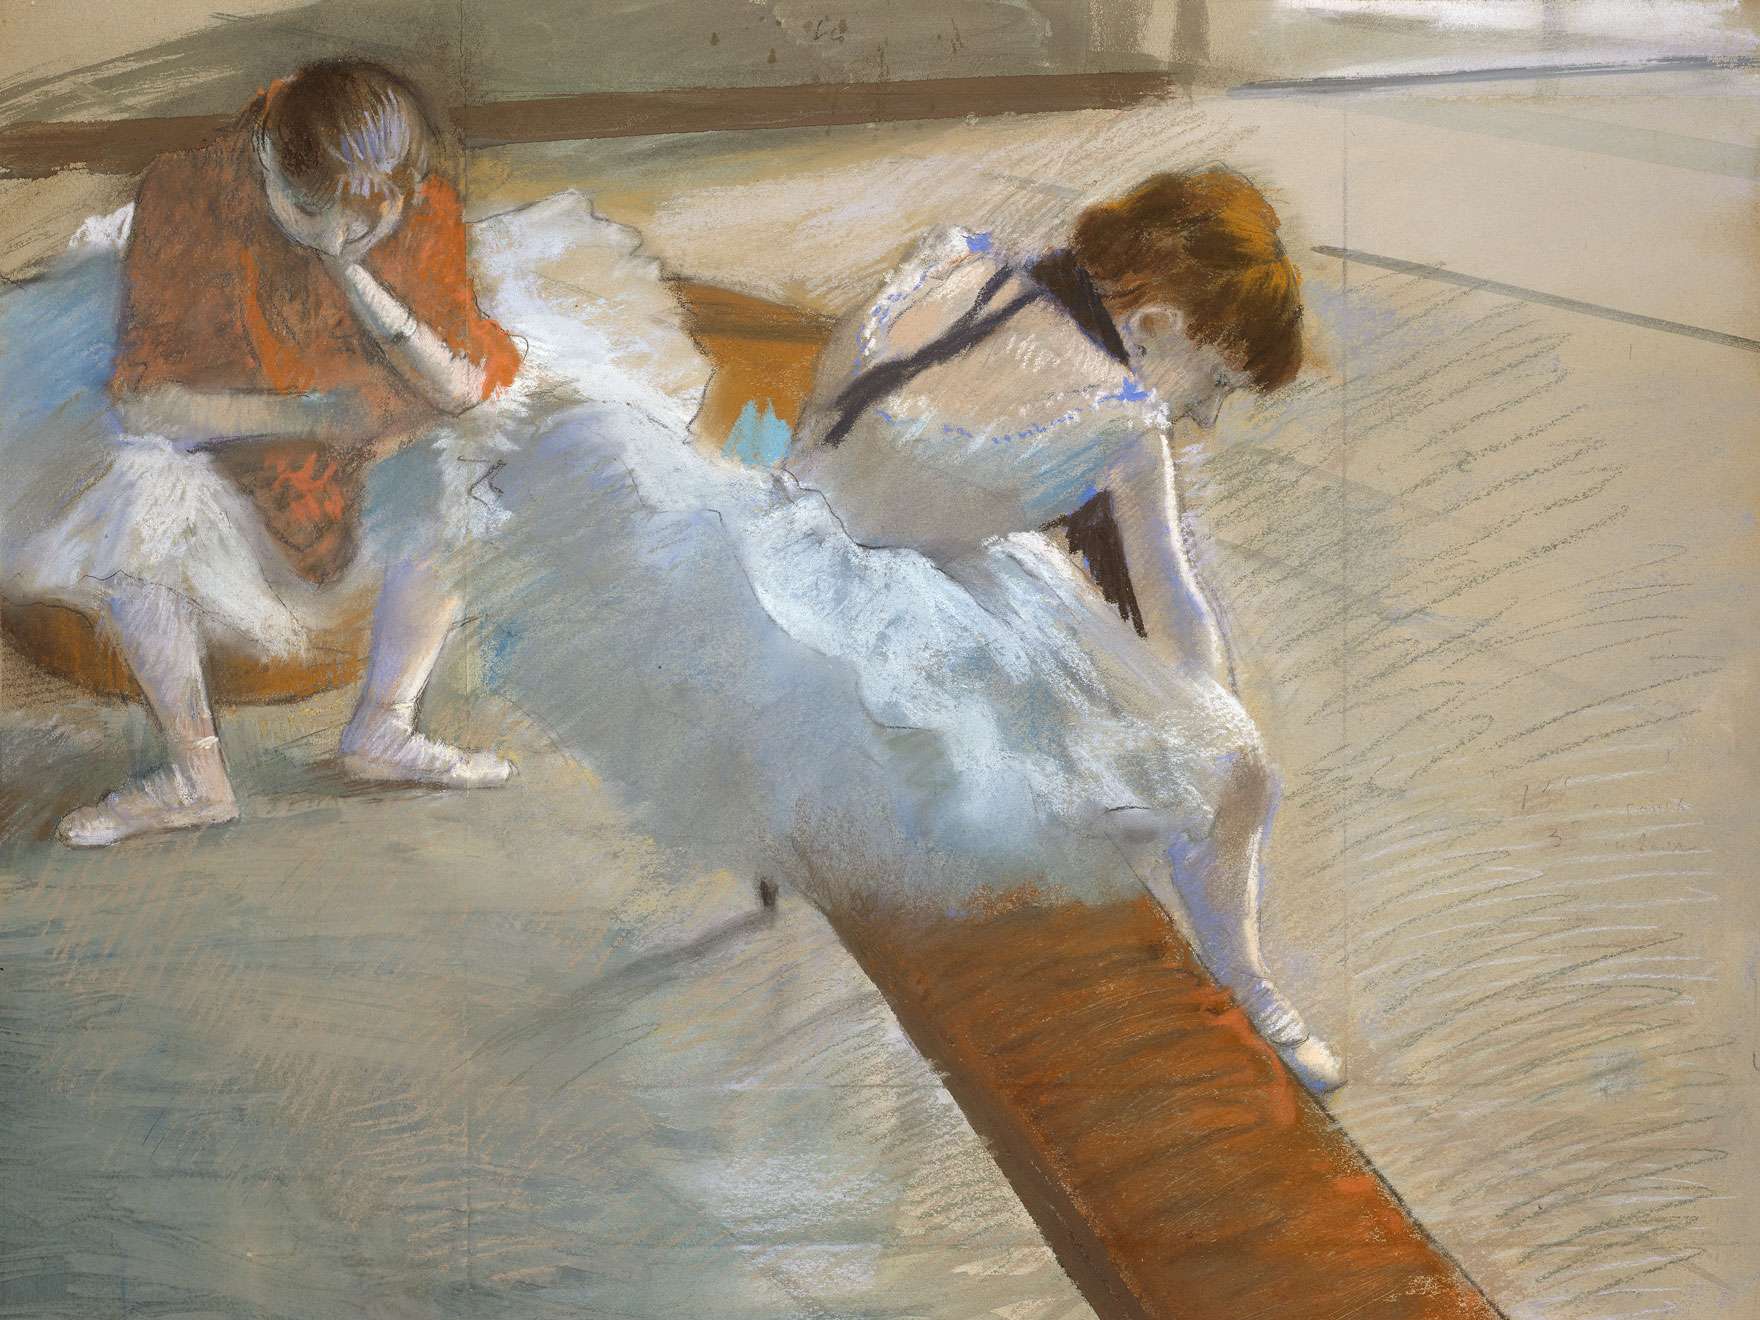 Edgar Degas, Dancers Resting, 1881–85. Pastel on paper mounted on cardboard. Juliana Cheney Edwards Collection. Source: MFA website.